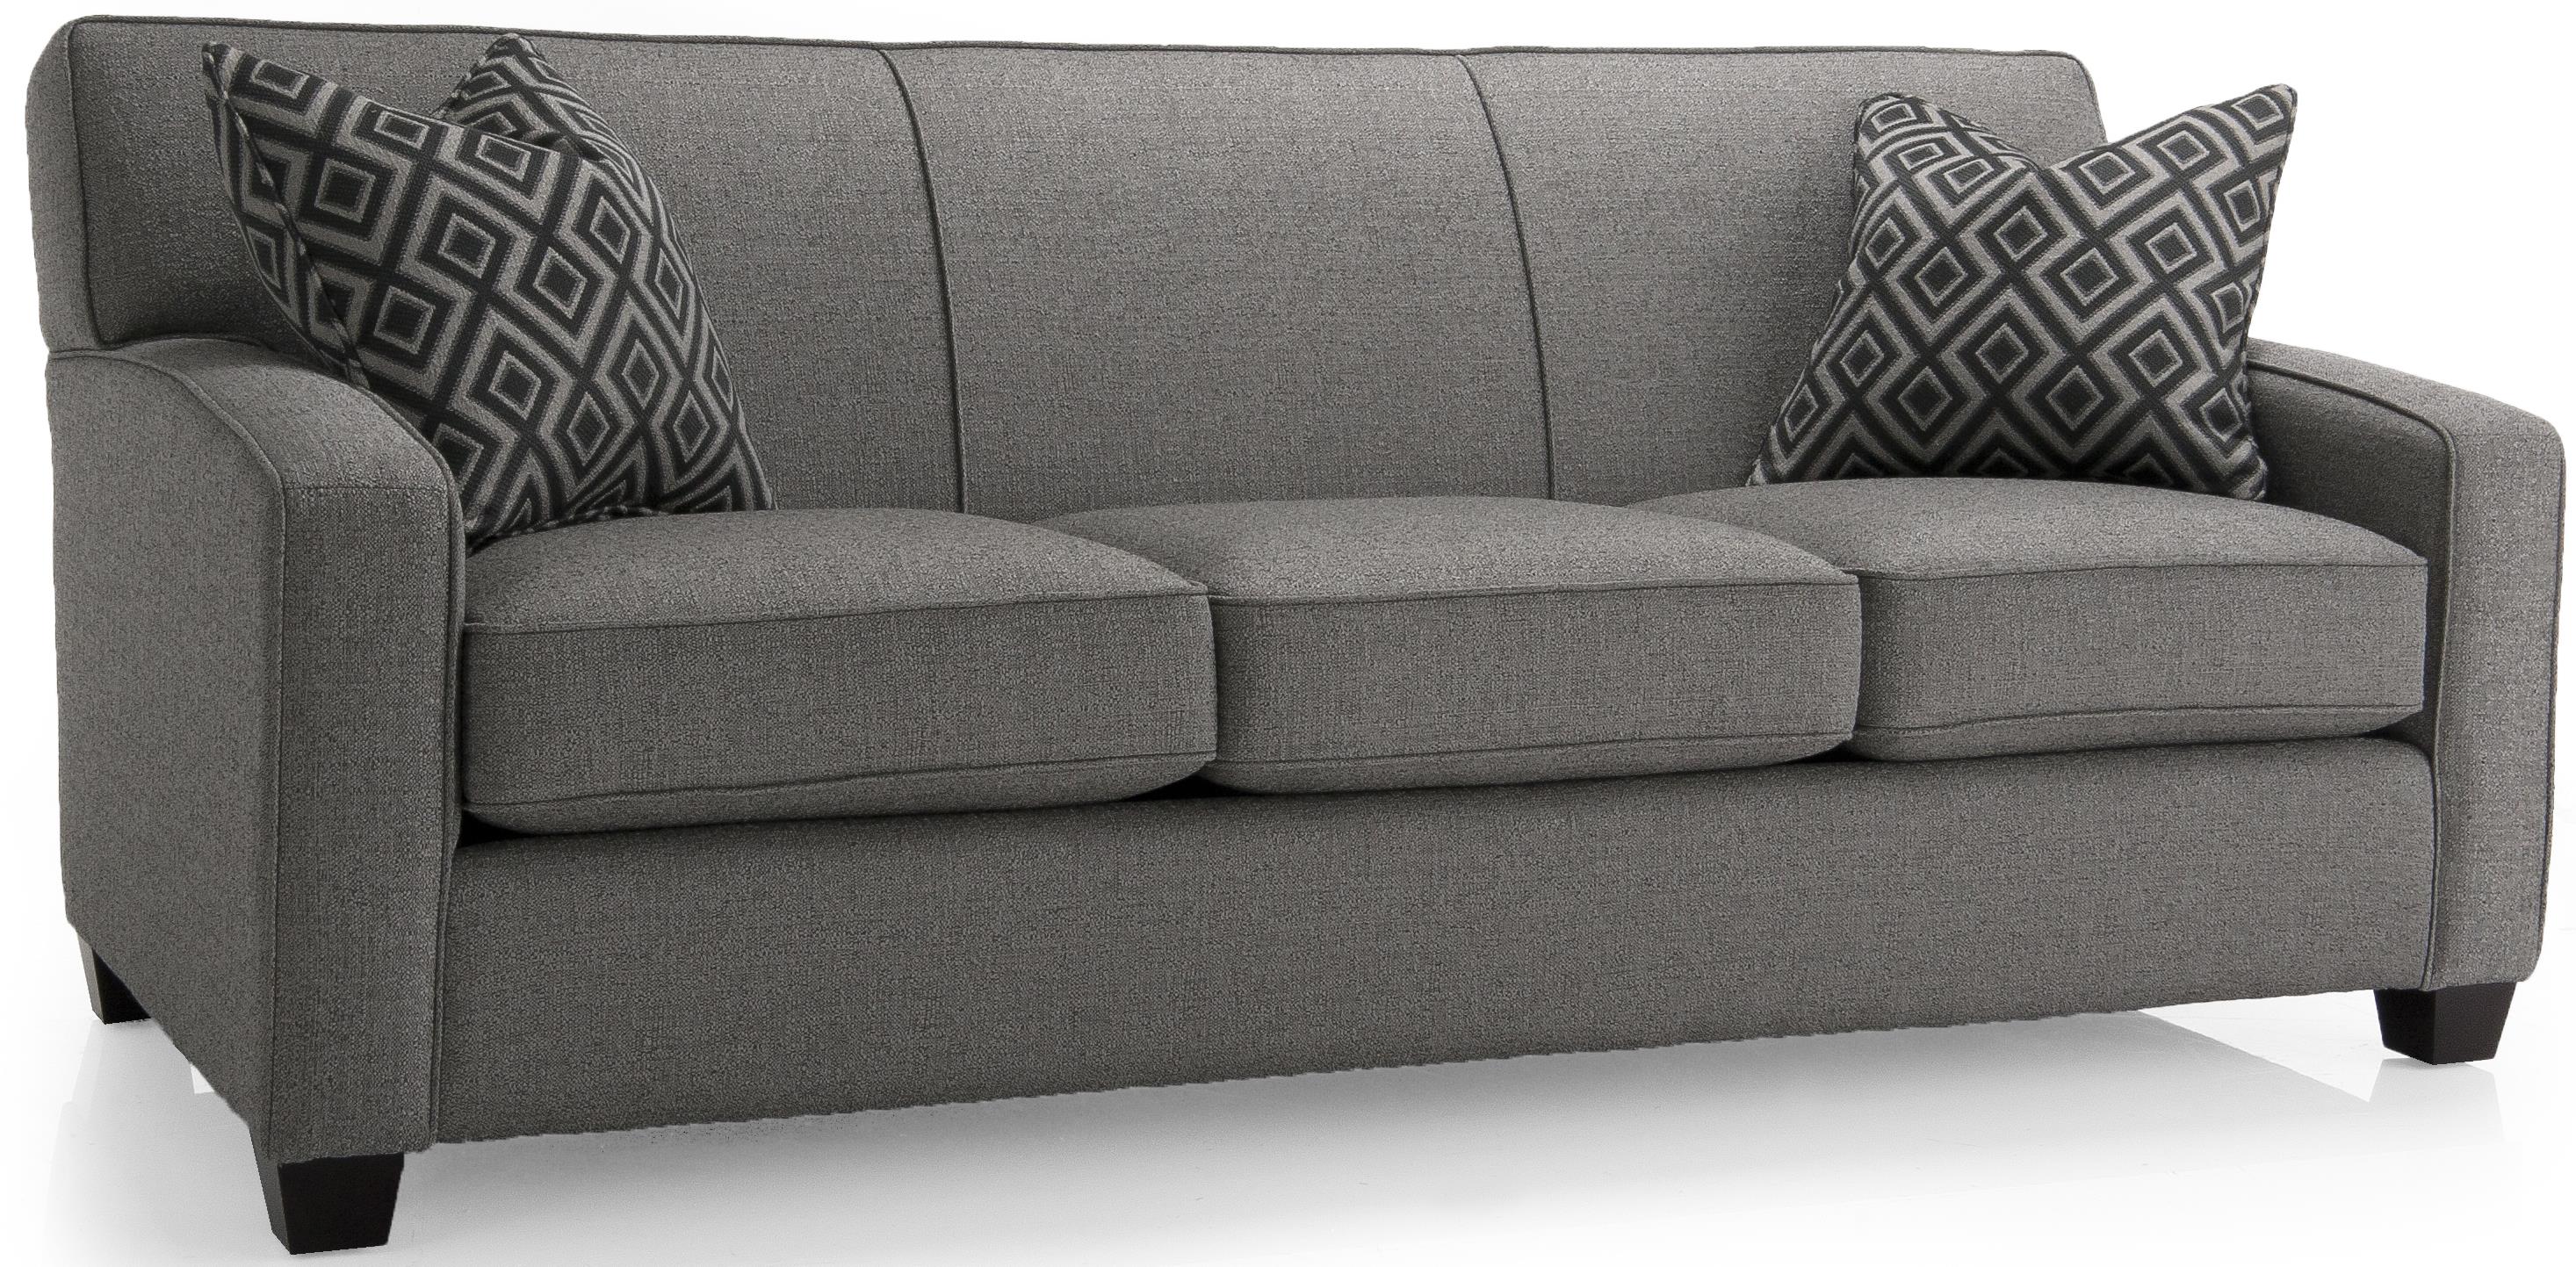 Decor-Rest 2401 Contemporary Stationary Sofa with Accent Pillows